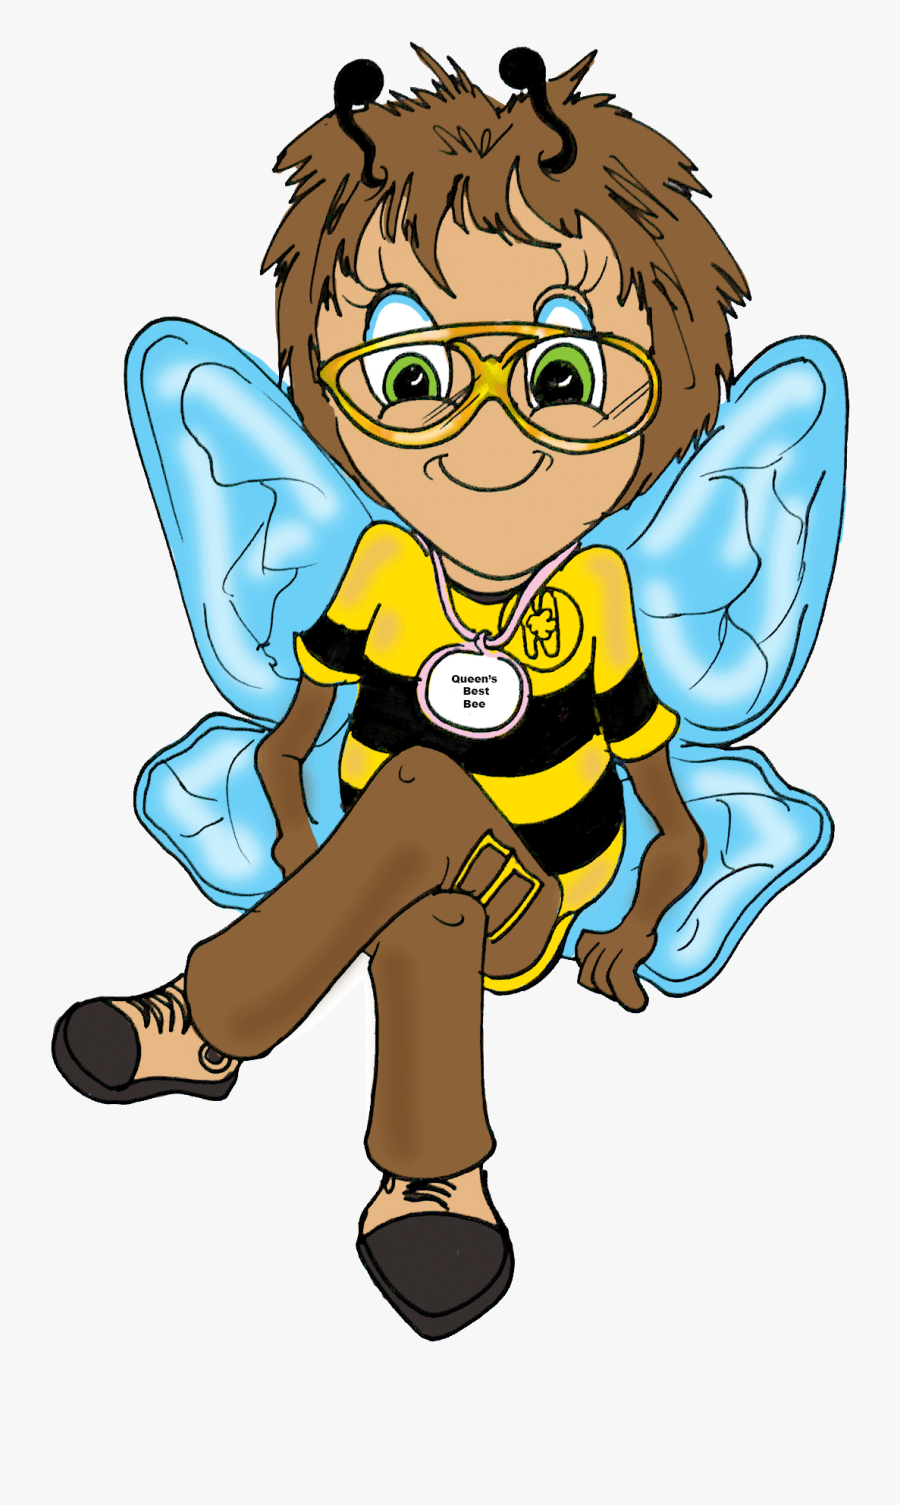 The Haley Honey Bee Series Of Children"s Books Have - Cartoon, Transparent Clipart